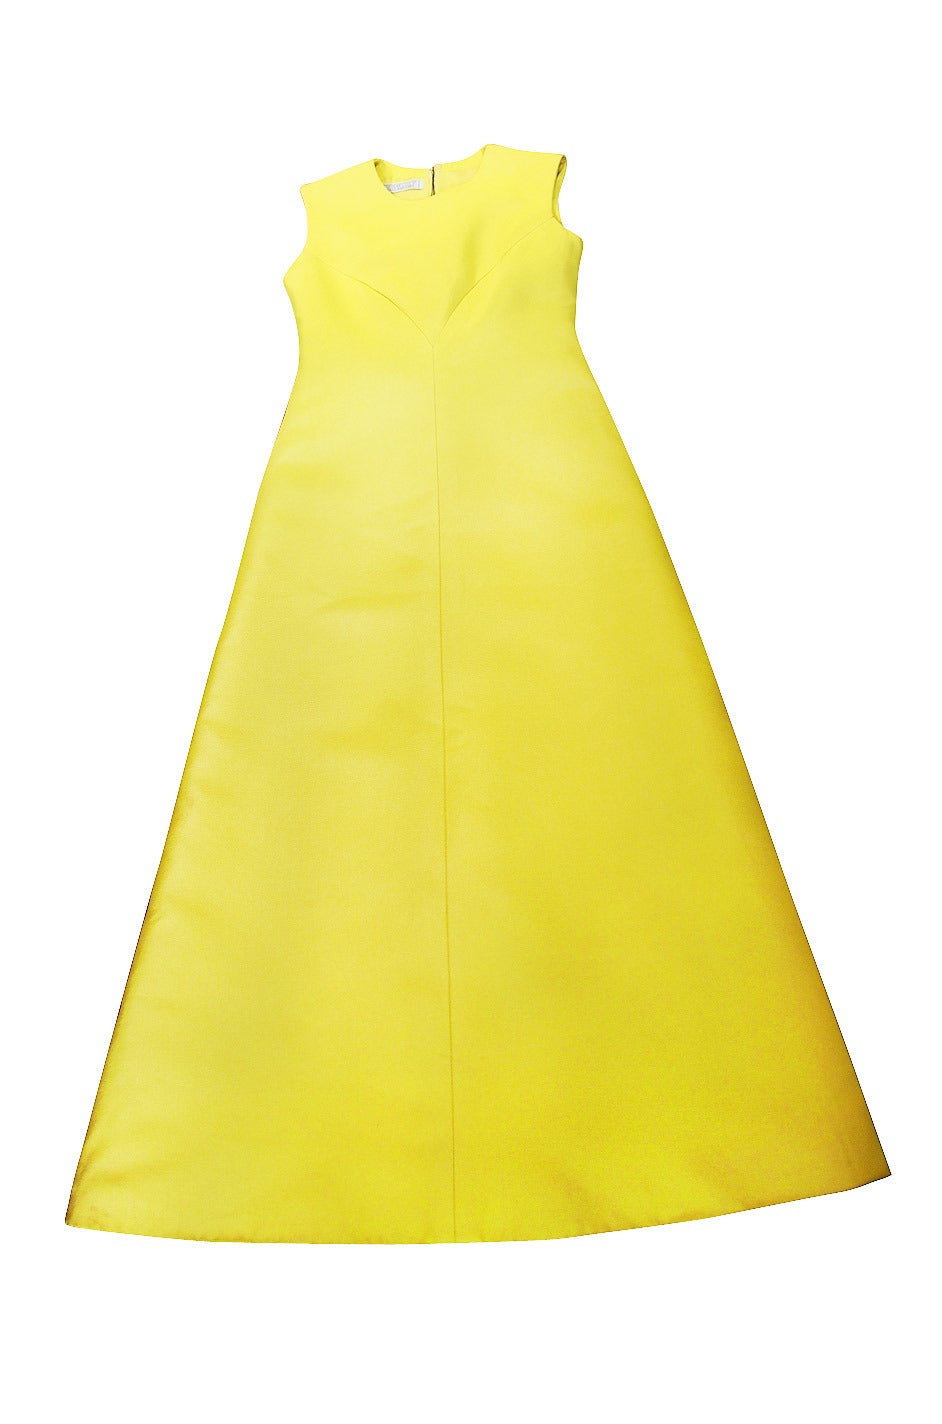 Rare 1960s Custom Sculptural Yellow Givenchy Gown 5